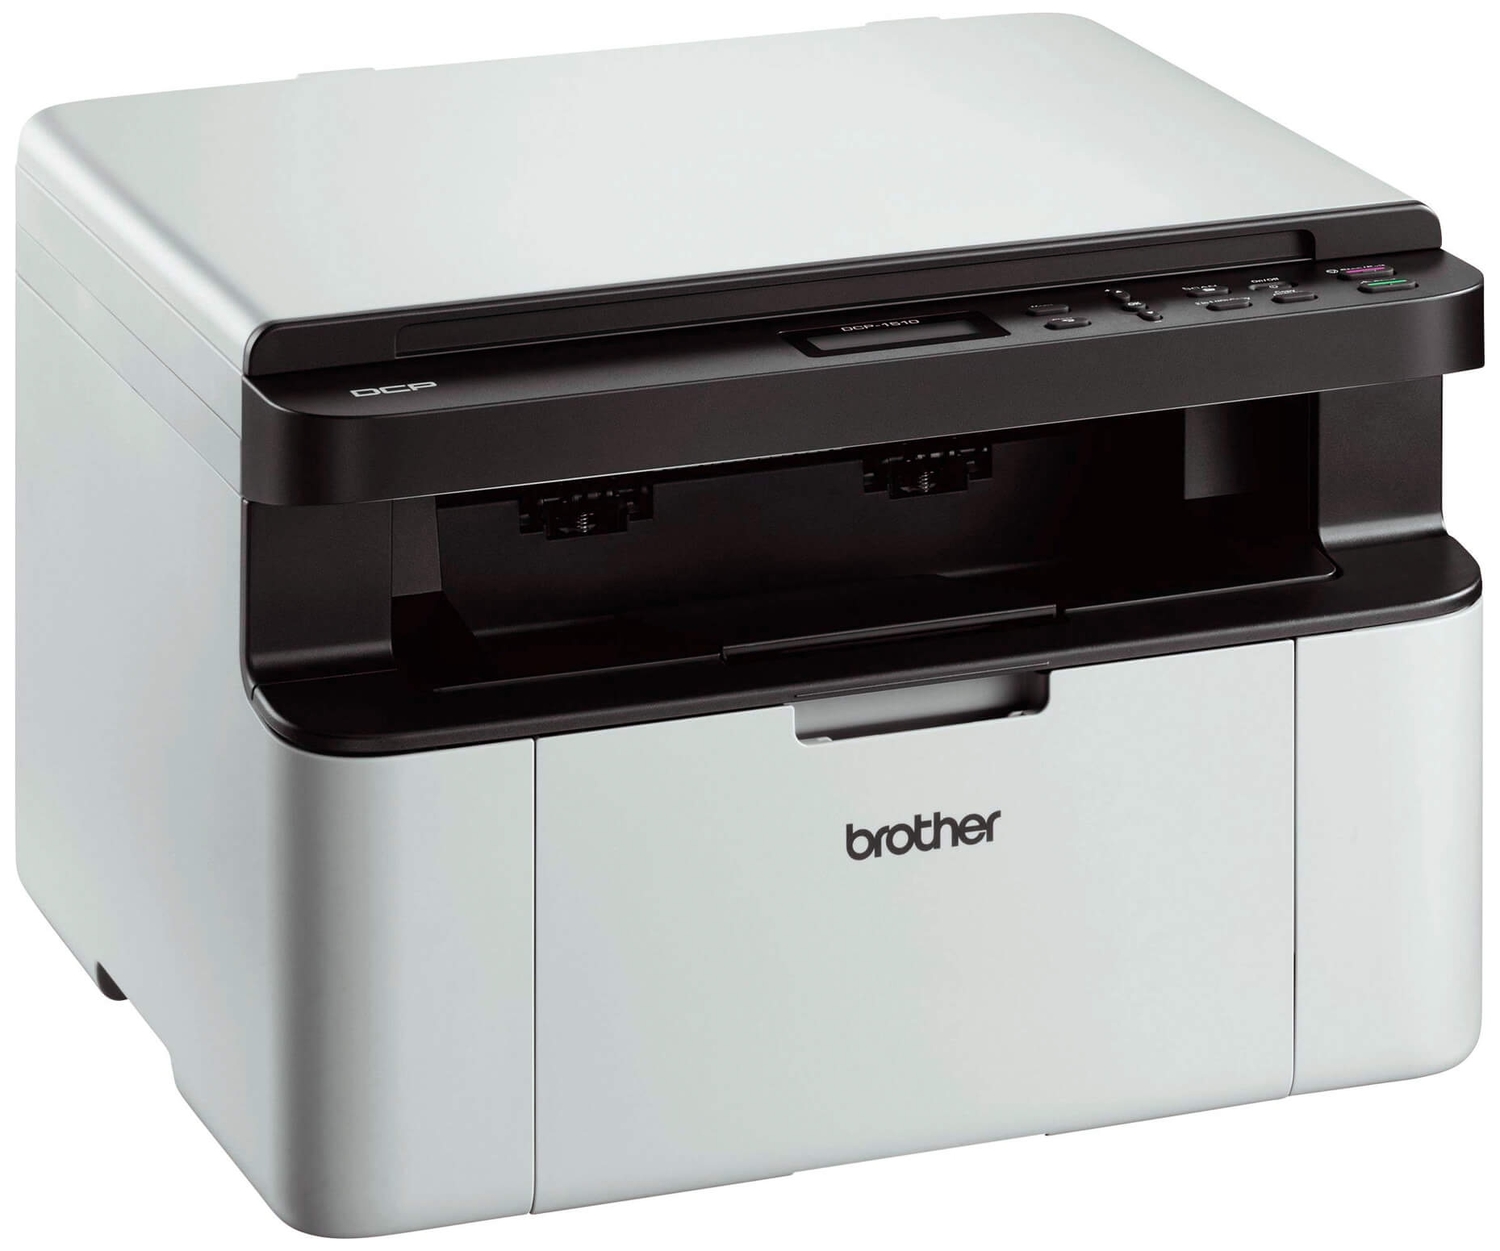 Brother 1610w. Brother DCP-1623wr. МФУ brother MFC-1815r. МФУ brother DCP-1510r. MFC-1810r.